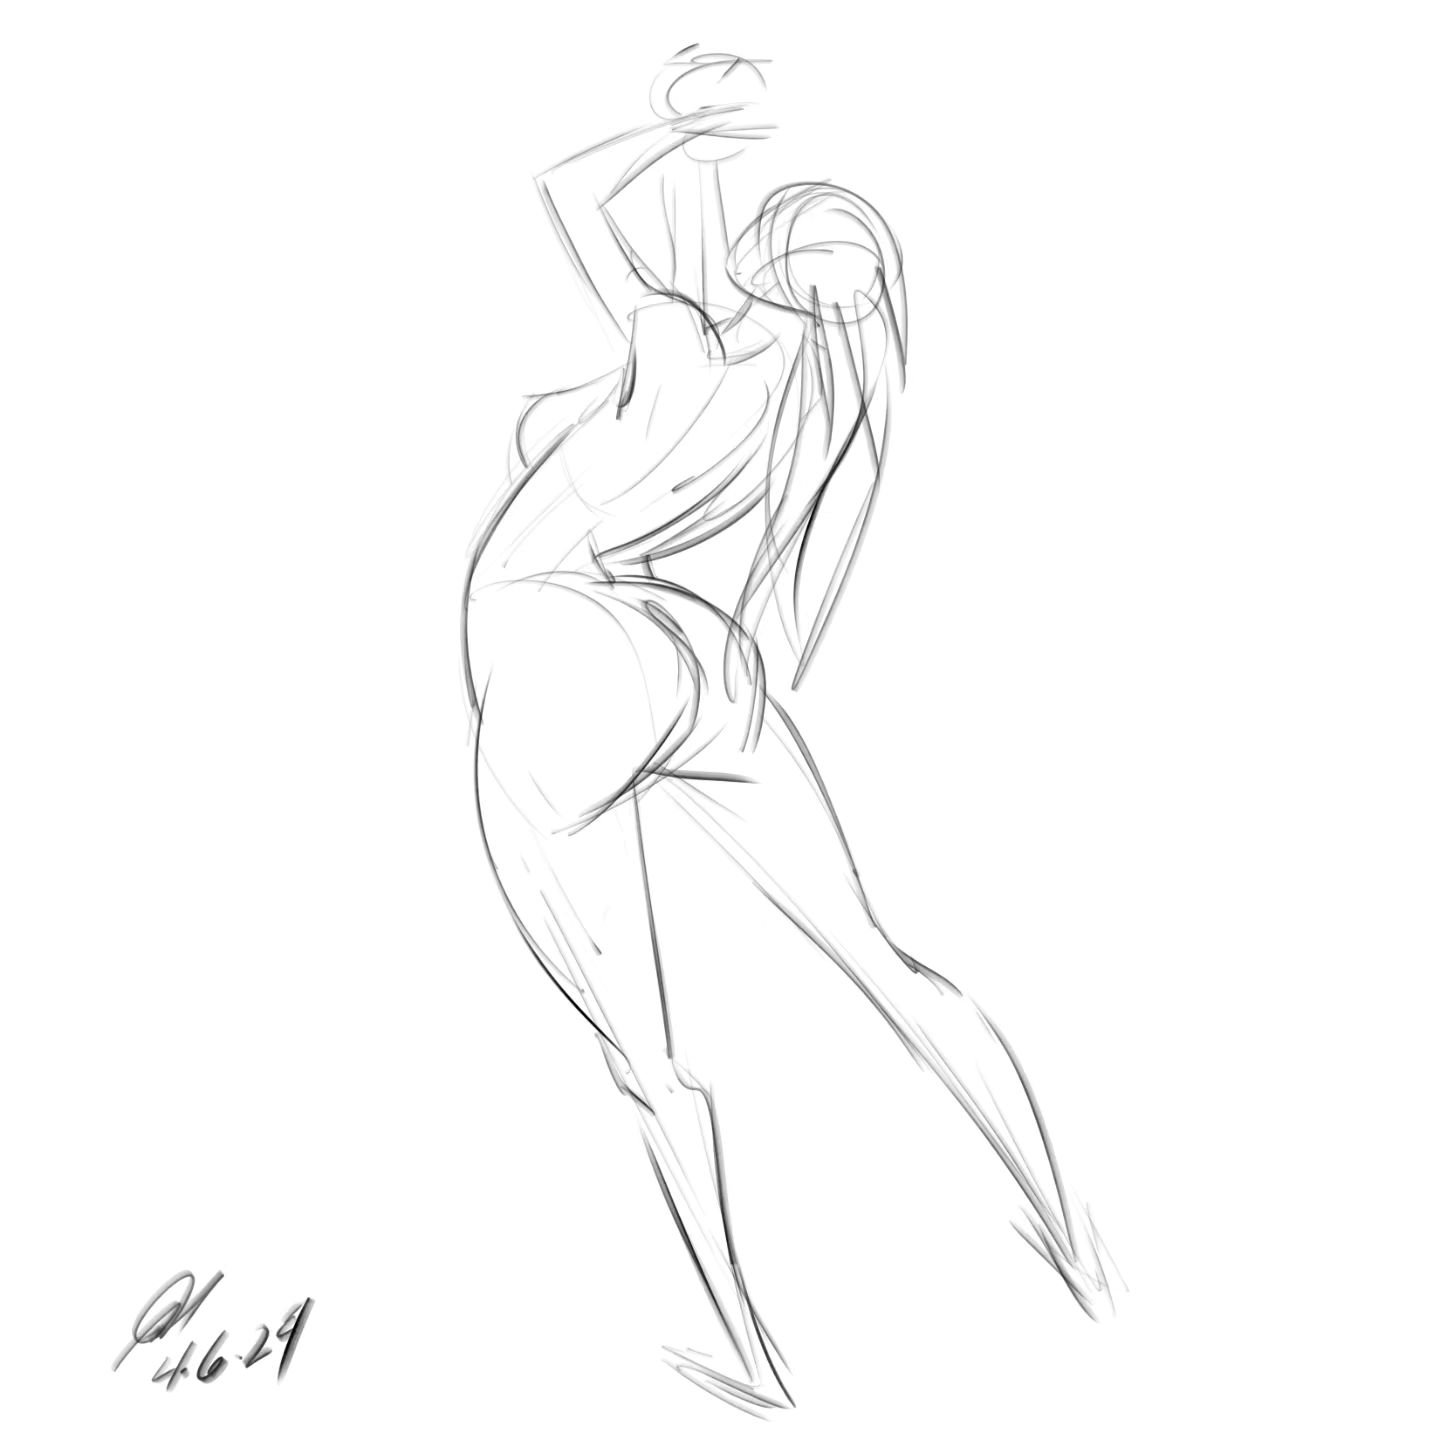 30 second poses of @artmodelmusingsinc during a 1 on 1 session. #gestures #figuredrawing #lifedrawing #croquis #digital #digitalart #sketches #quicksketch